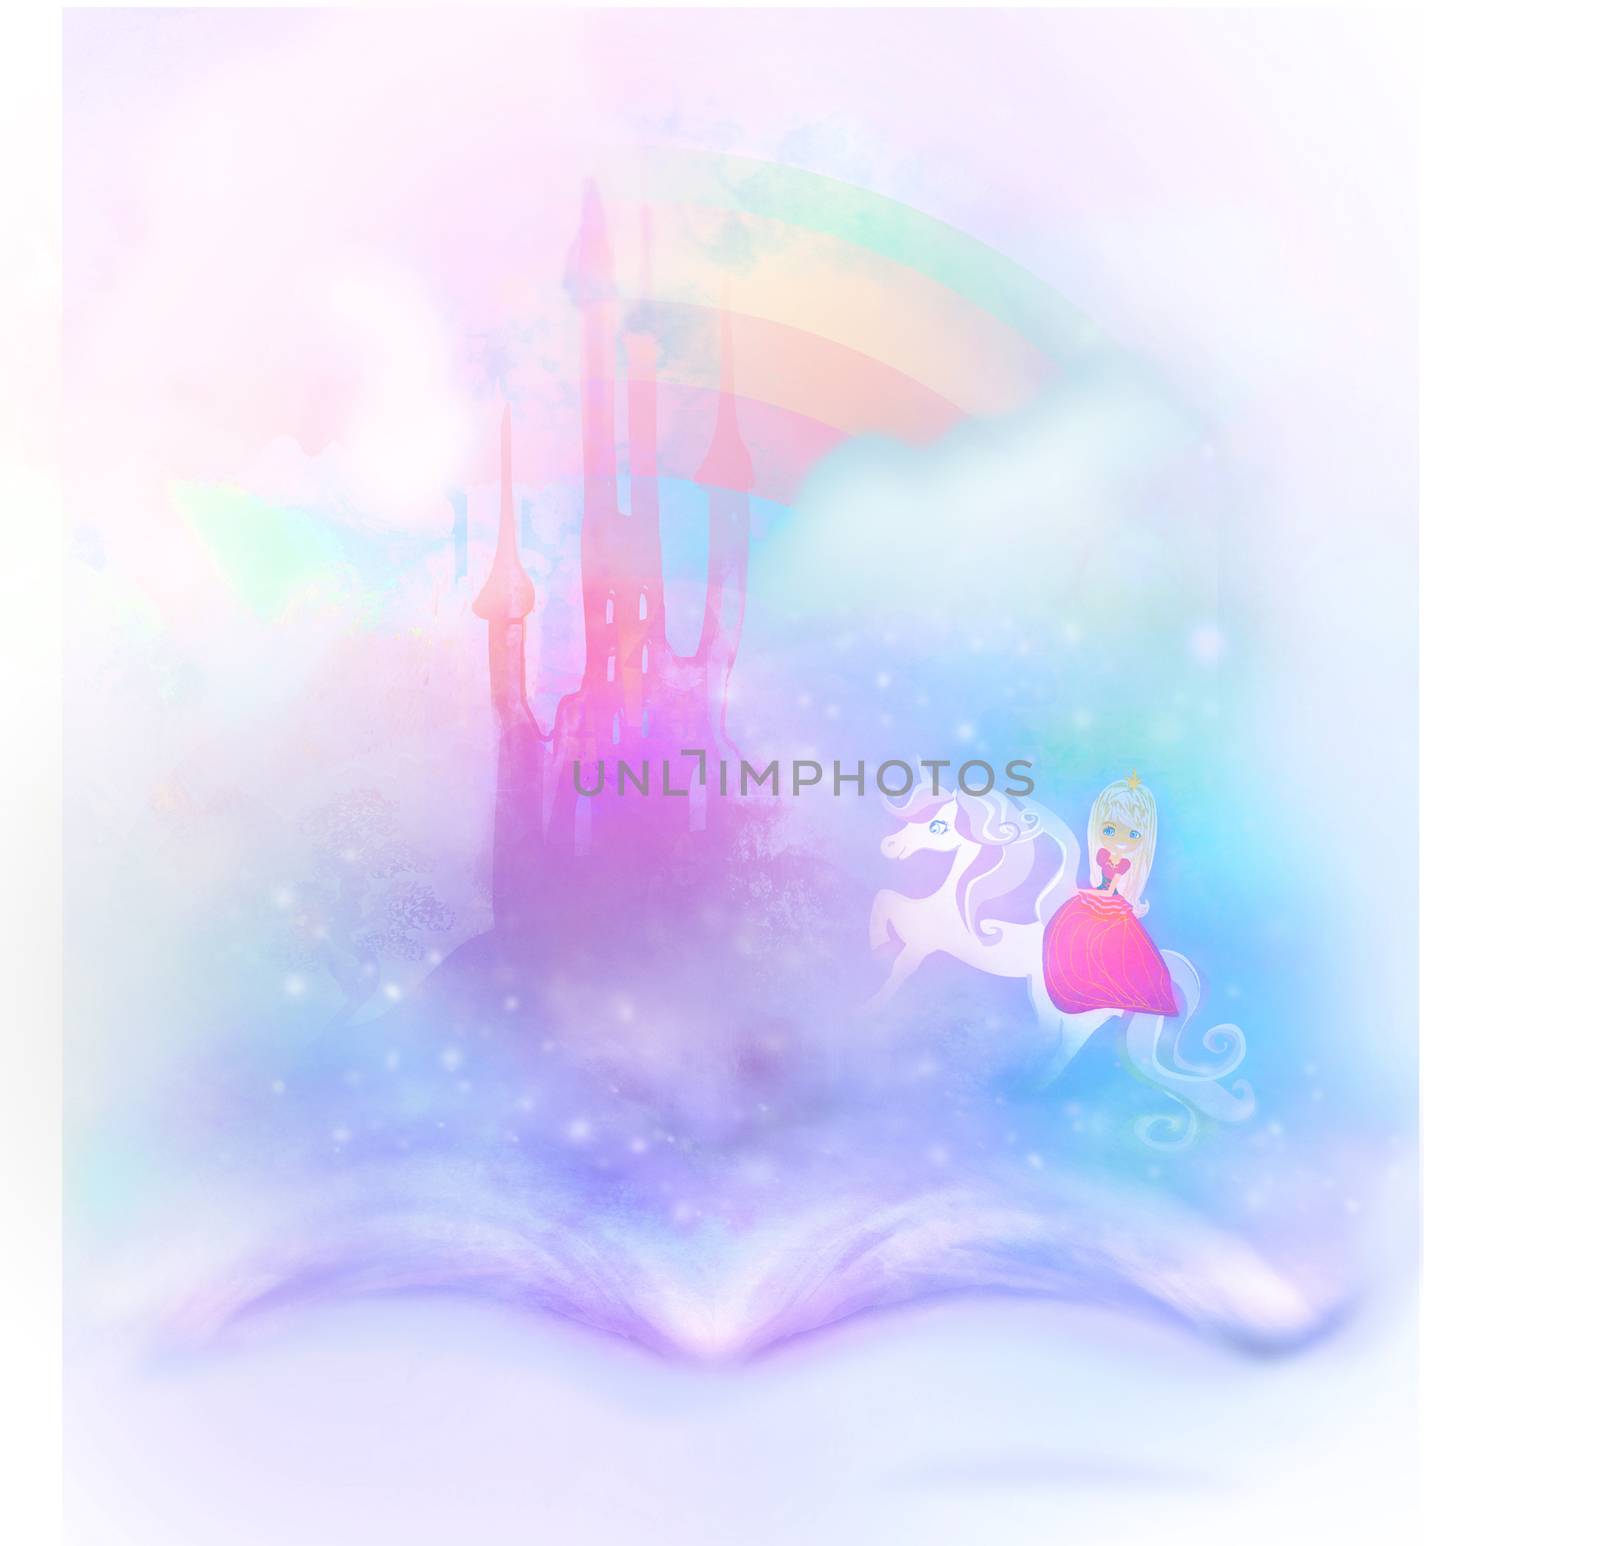 Magic world of tales, fairy castle appearing from the book by JackyBrown